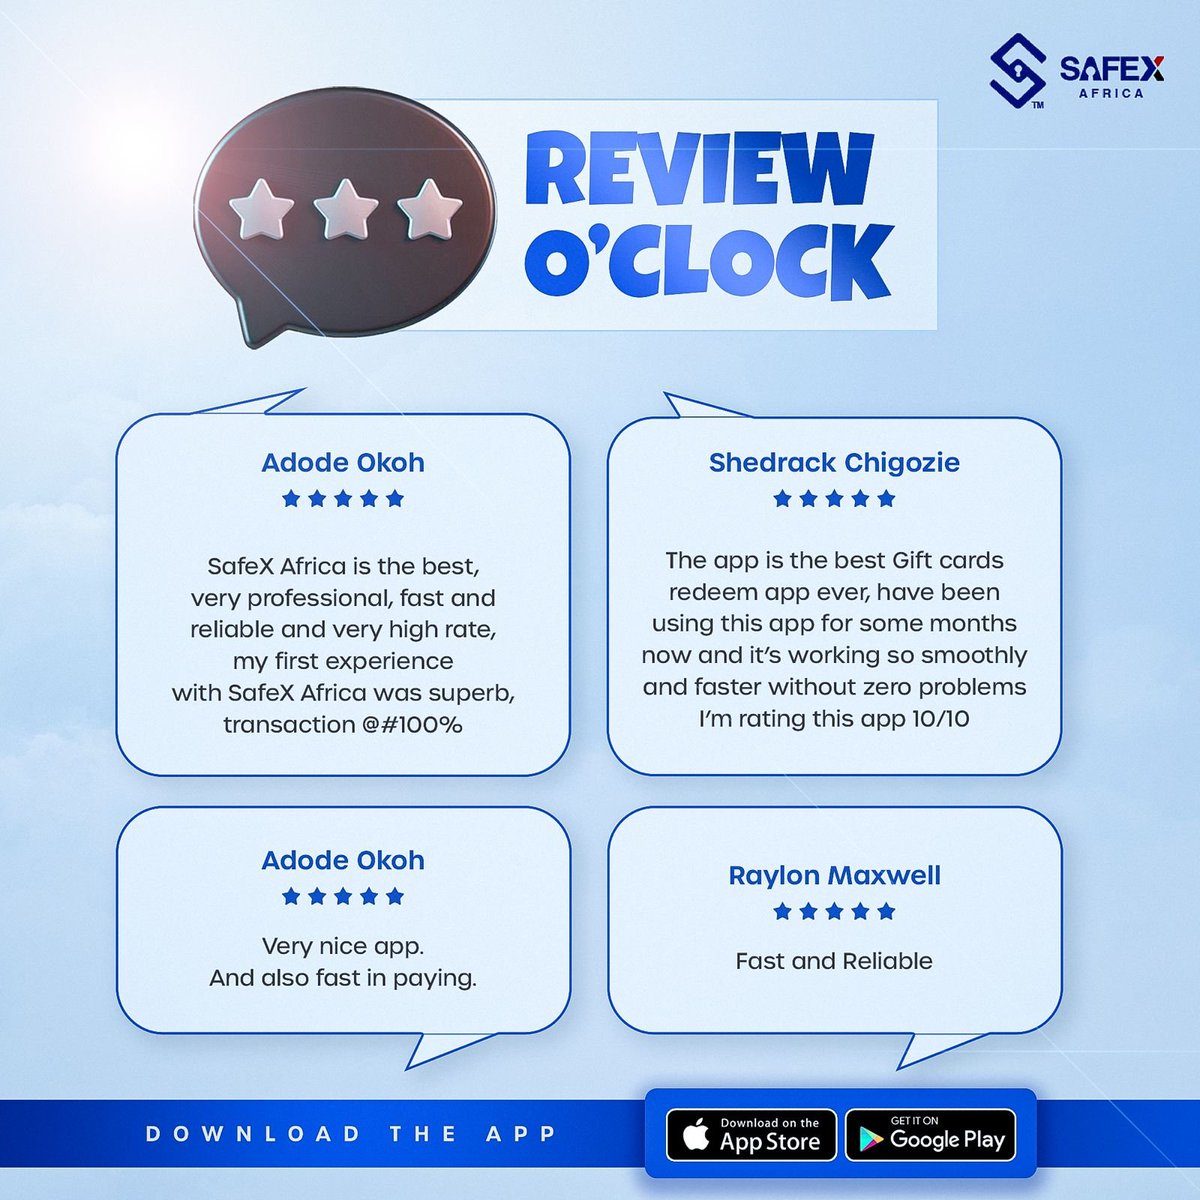 It's a good day to show you what some of our users are saying.
Join the better side.
#Reviews #safeX